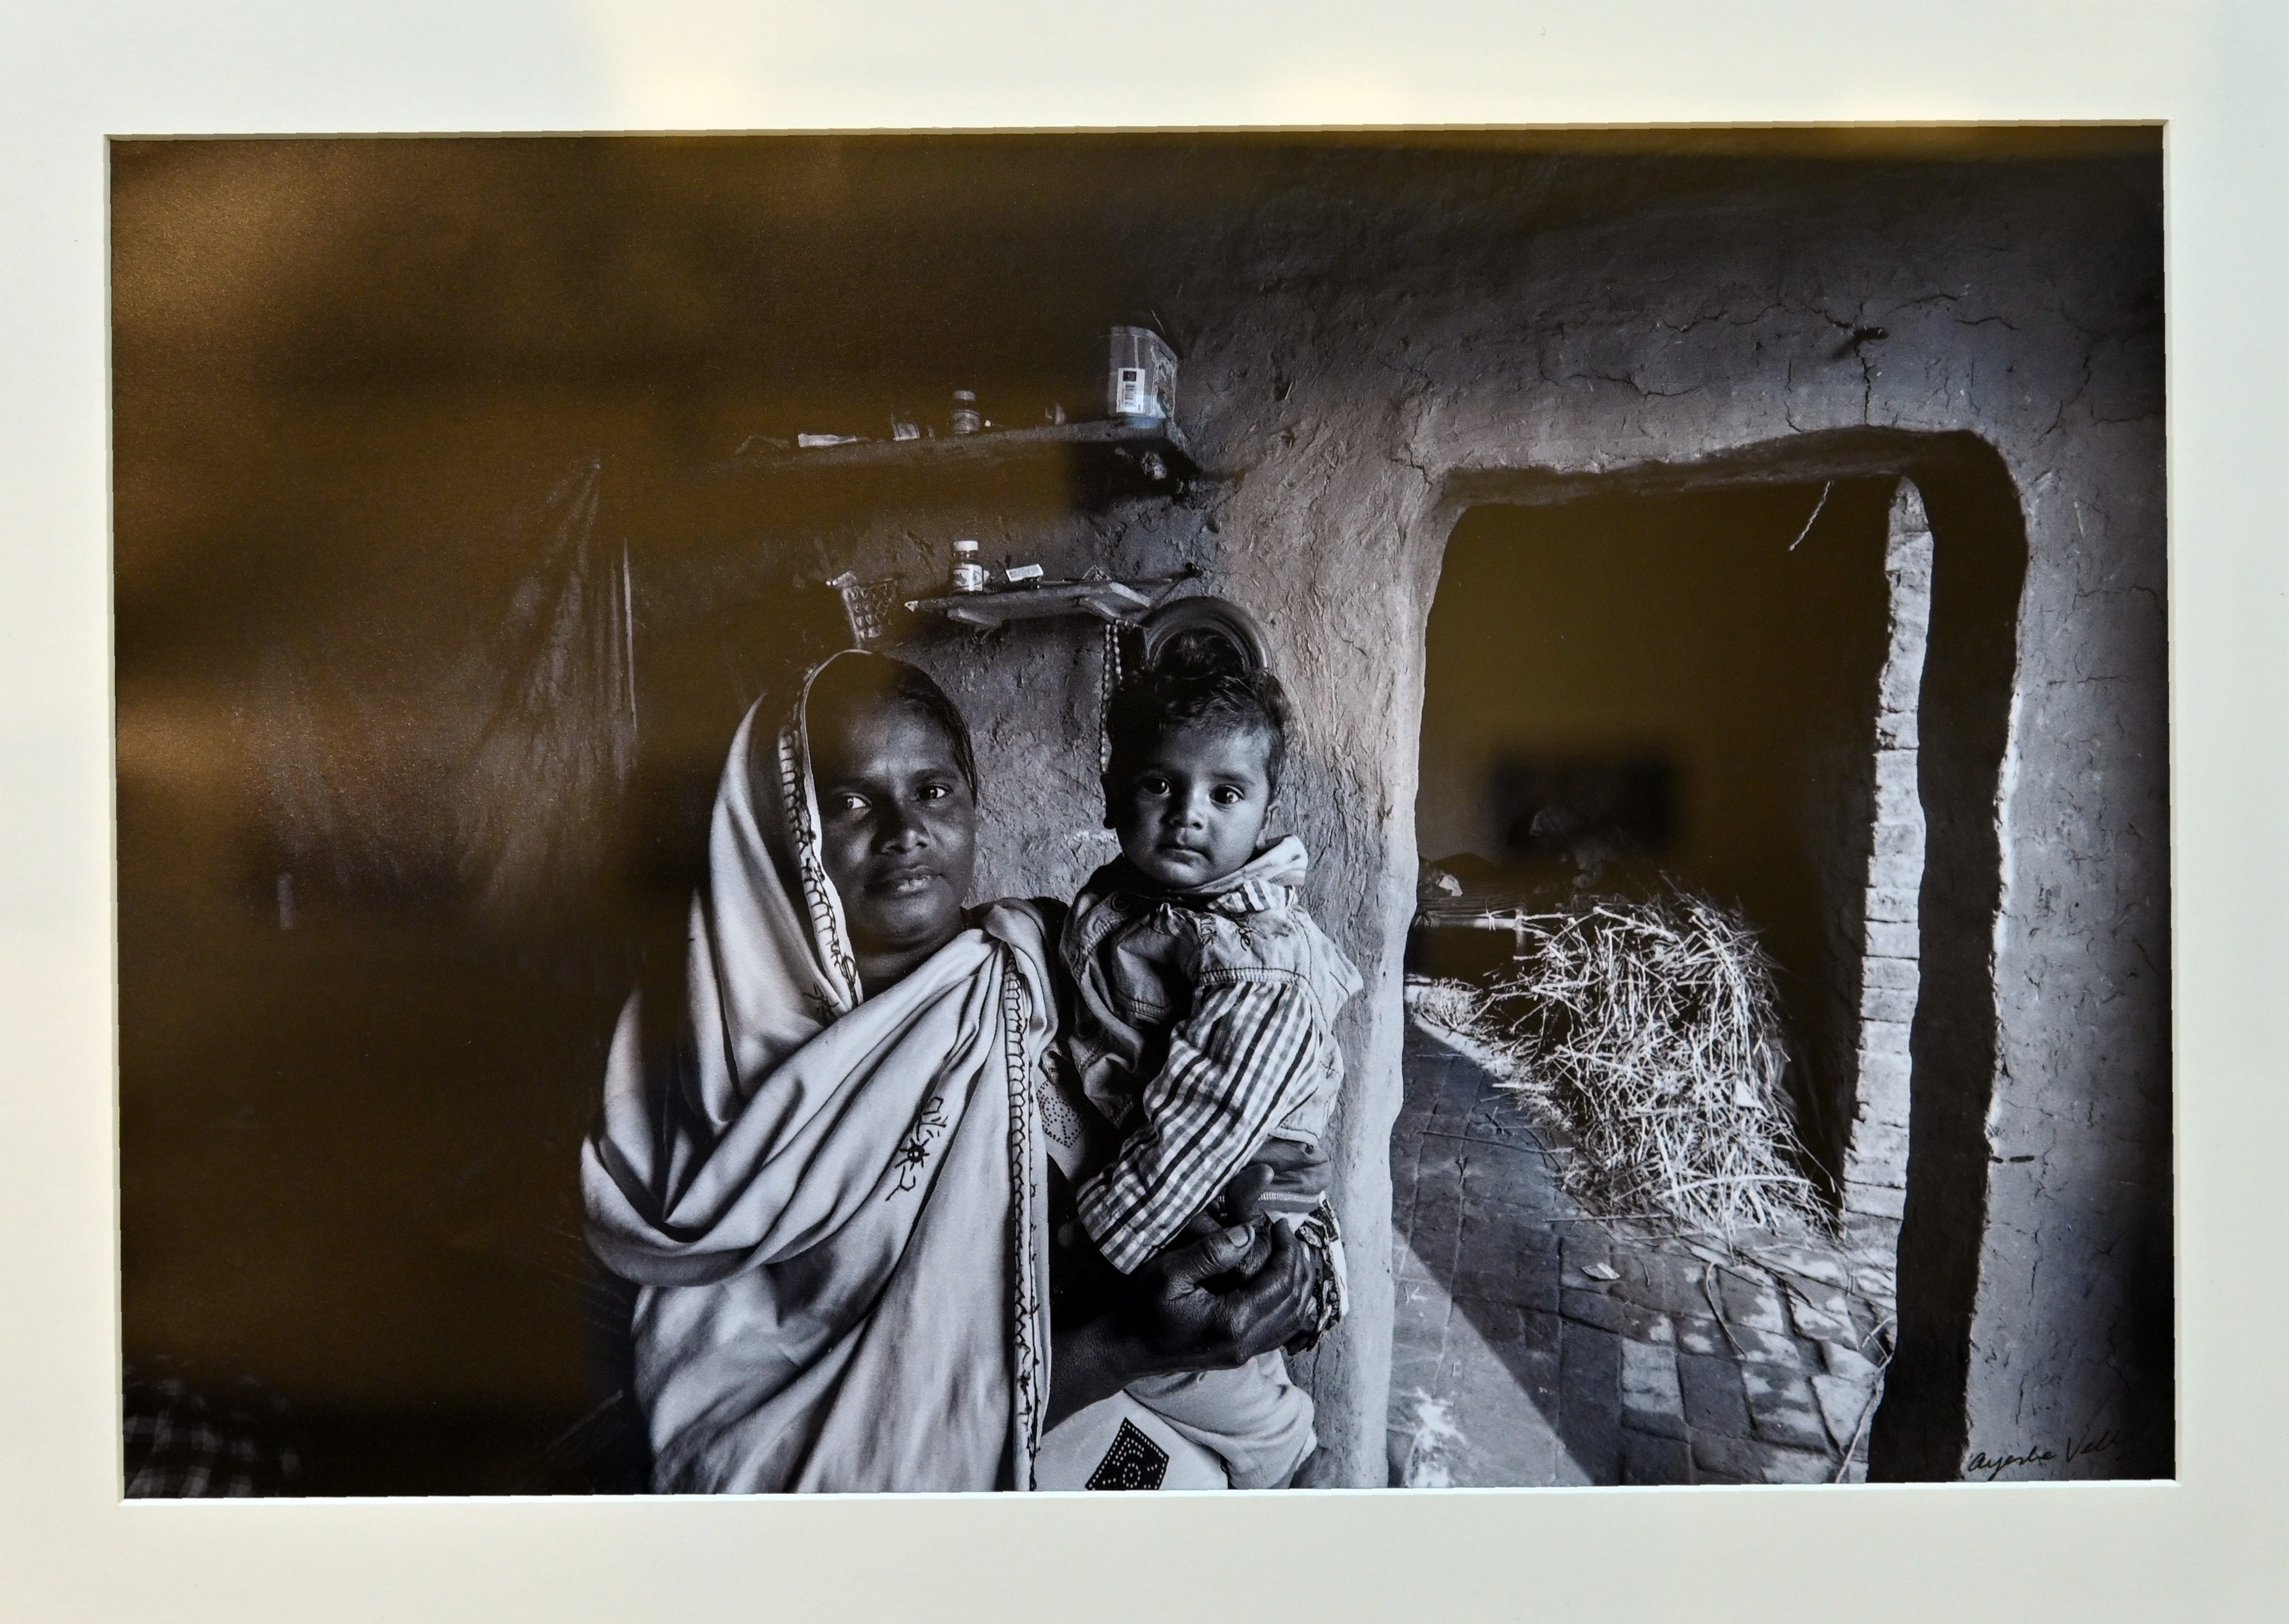 A picture of a mother with her son displayed at PNCA, under the theme of Retelling the Story of Pakistani Photographers’ Journey